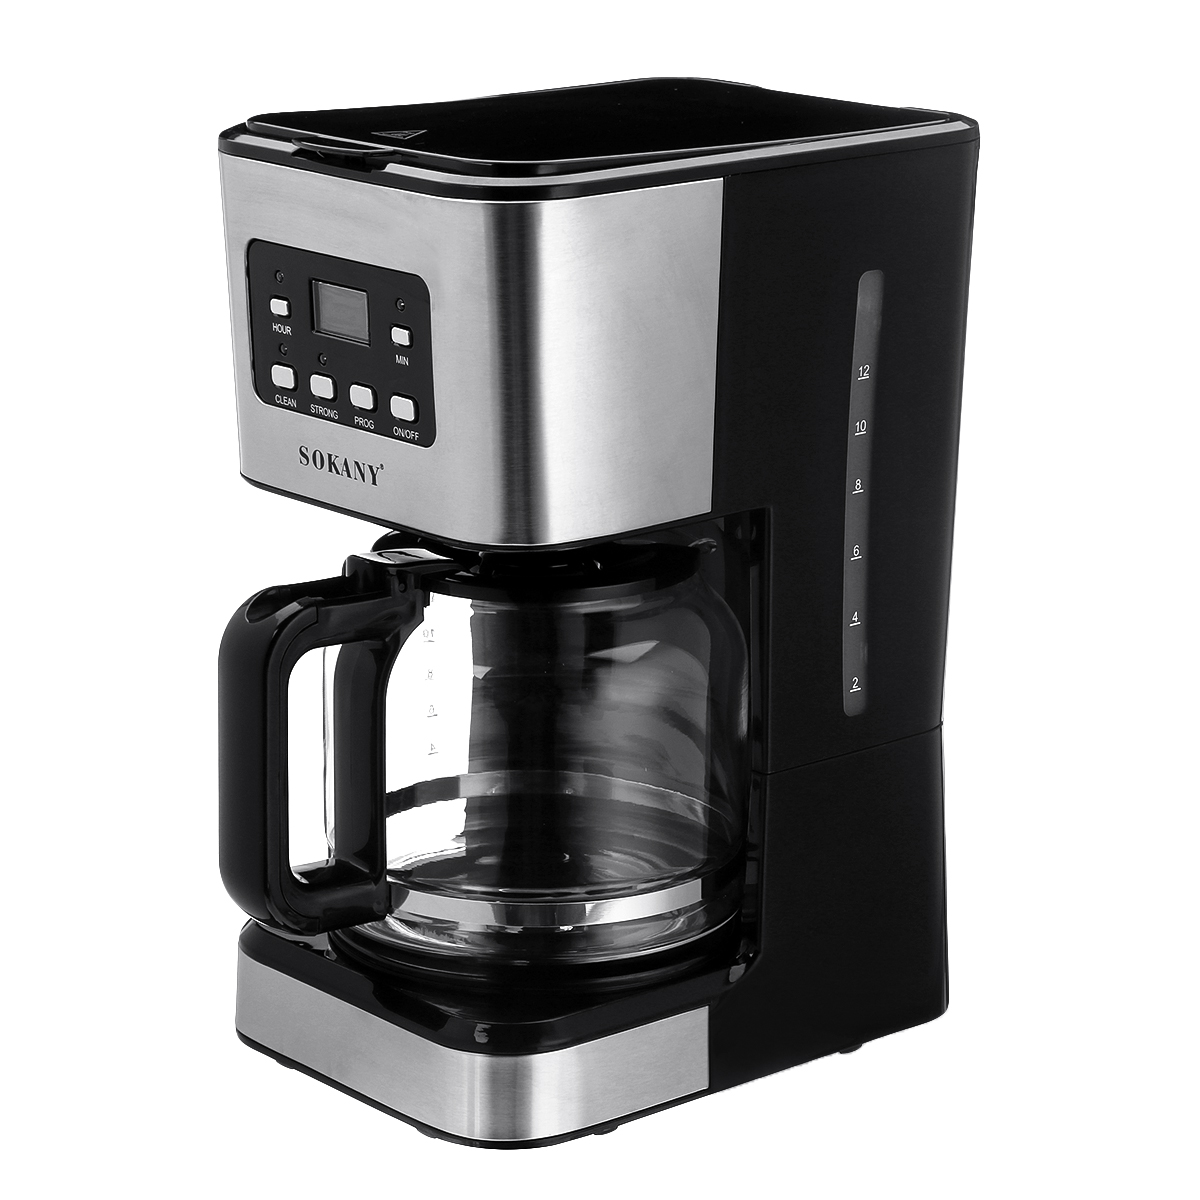 220V Coffee Maker 12 Cups 1.5L Semi-Automatic Espresso Making Machine Stainless Steel 25